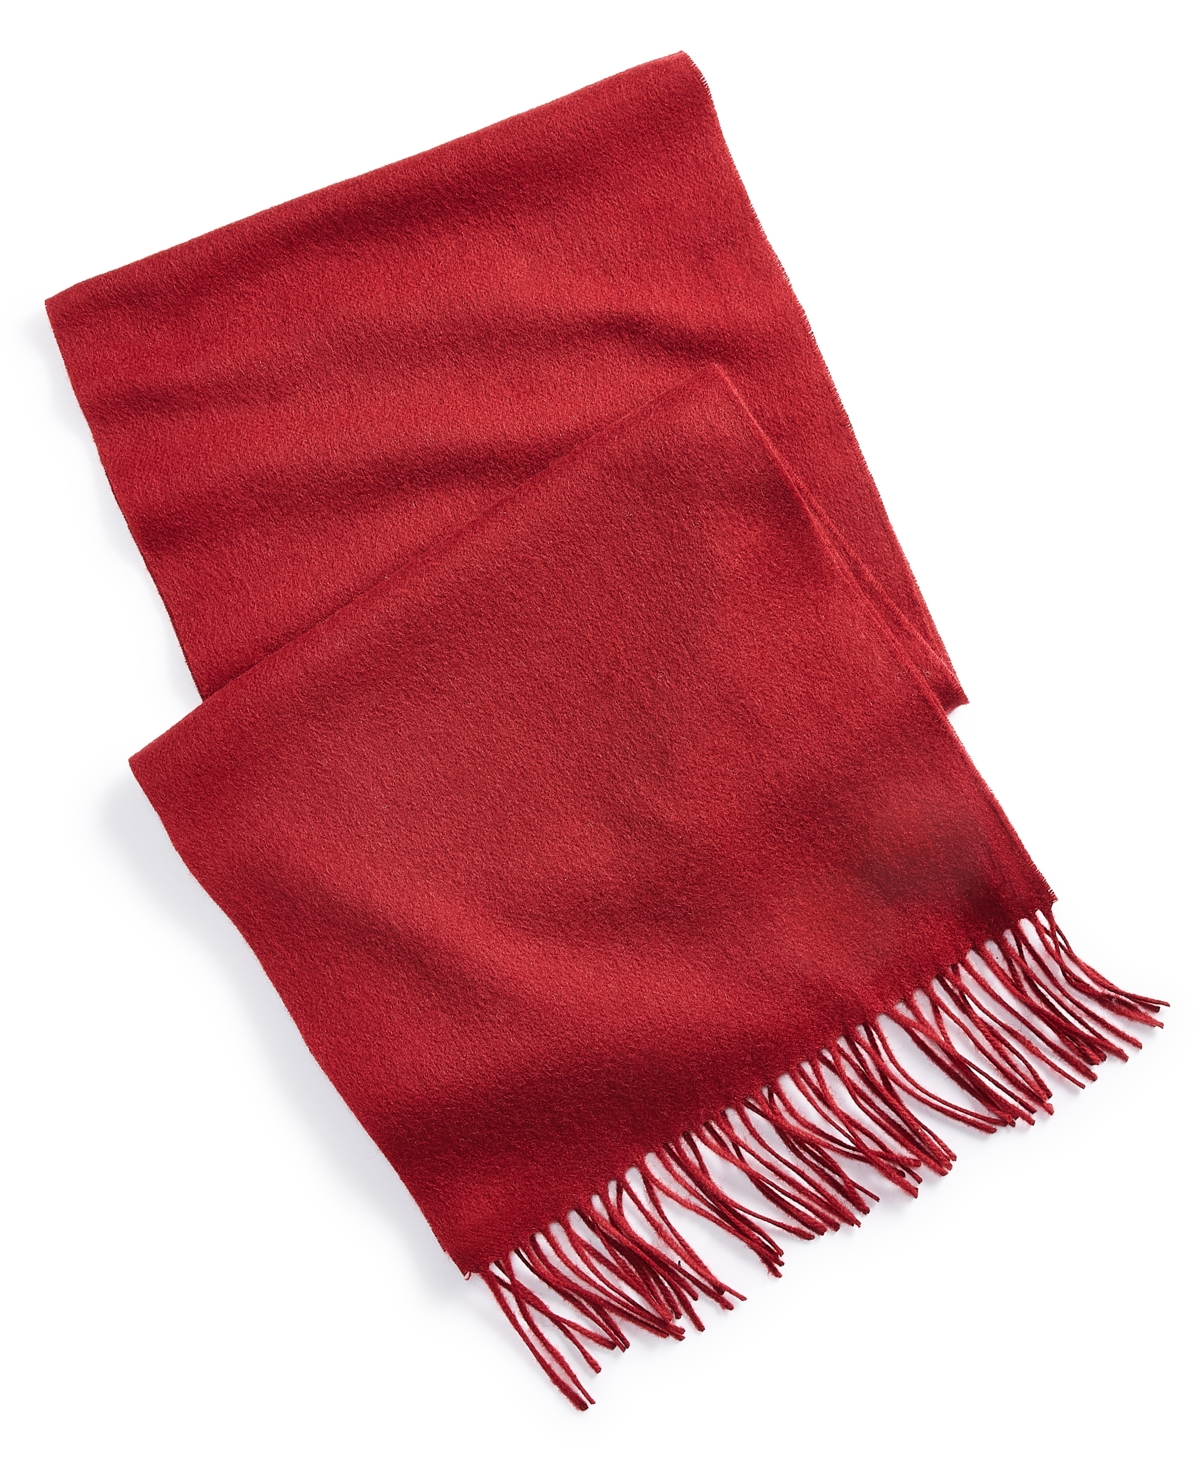 Men's 100% Cashmere Scarf, Created for Macy's - Tan